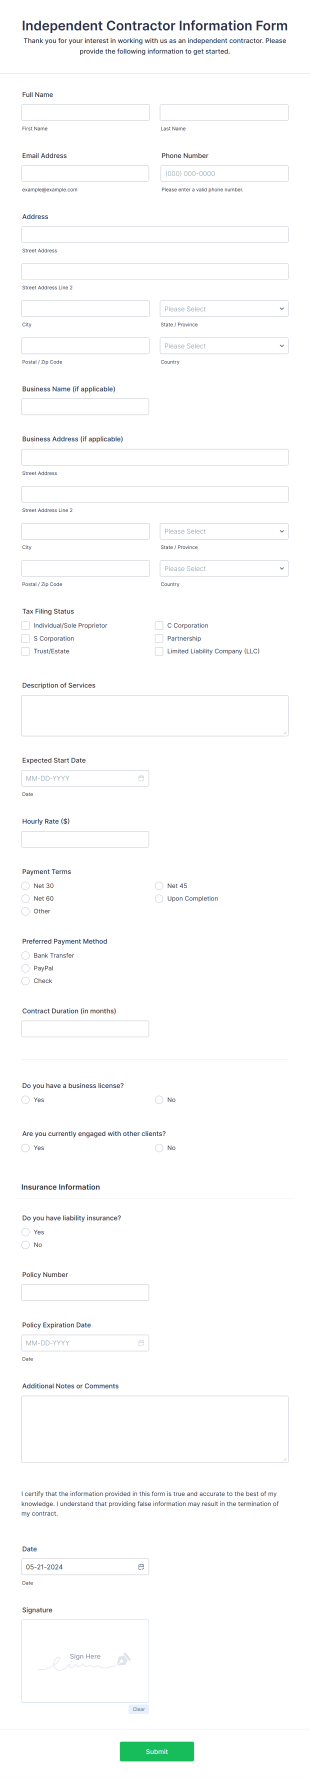 Independent Contractor Information Form Template